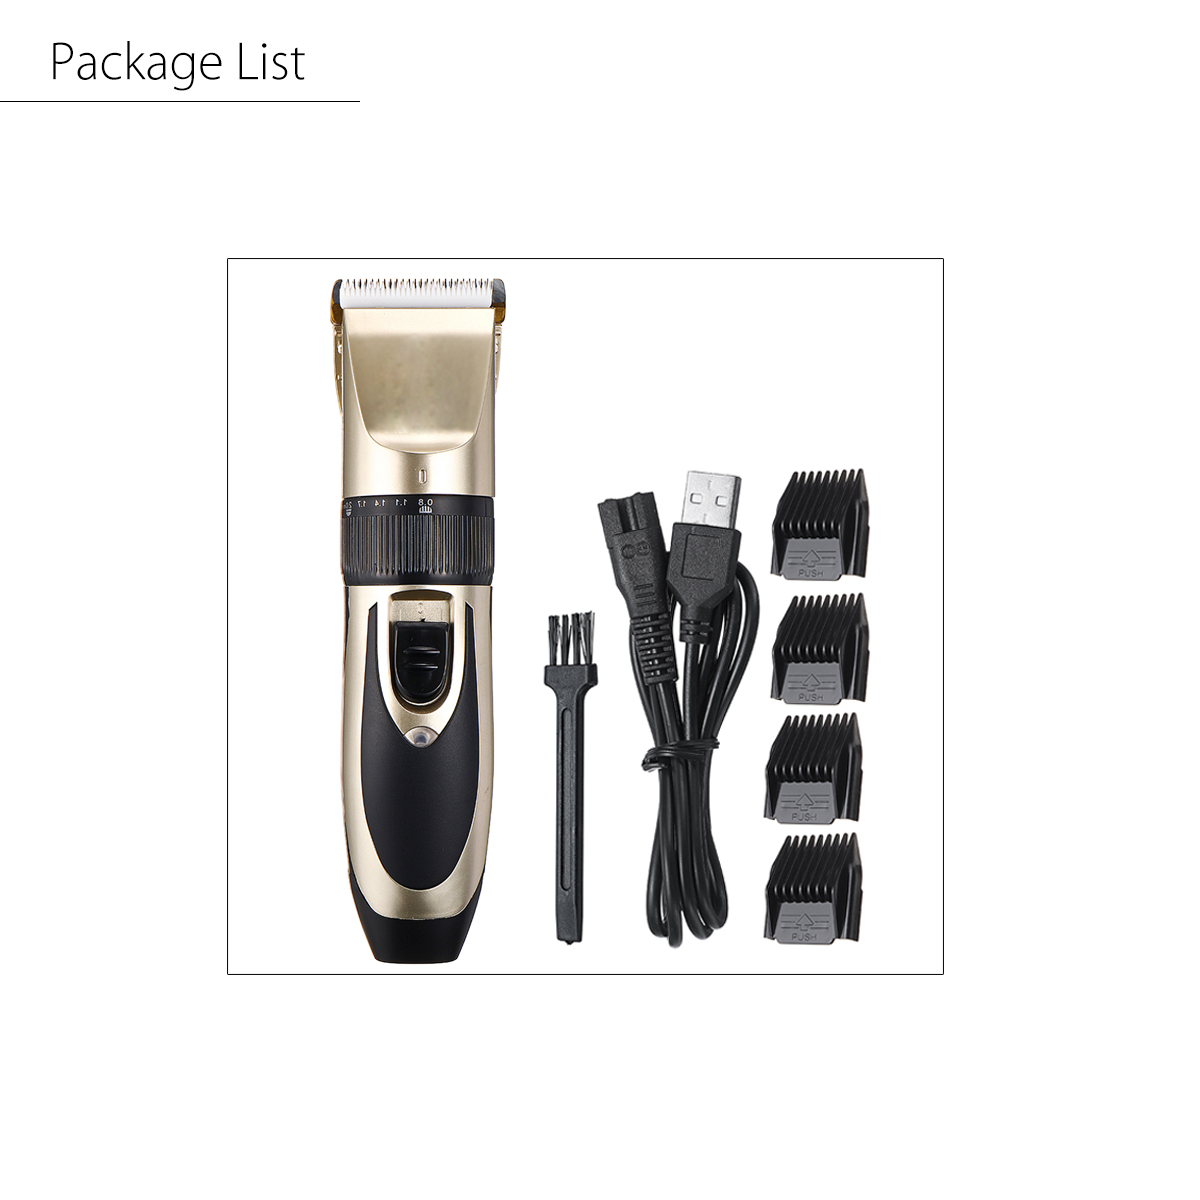 Professional Quiet Electric Pet Hair Clipper Shaver Cordless Grooming Kit for Cat Dog Hair Best Gift - image 4 of 9